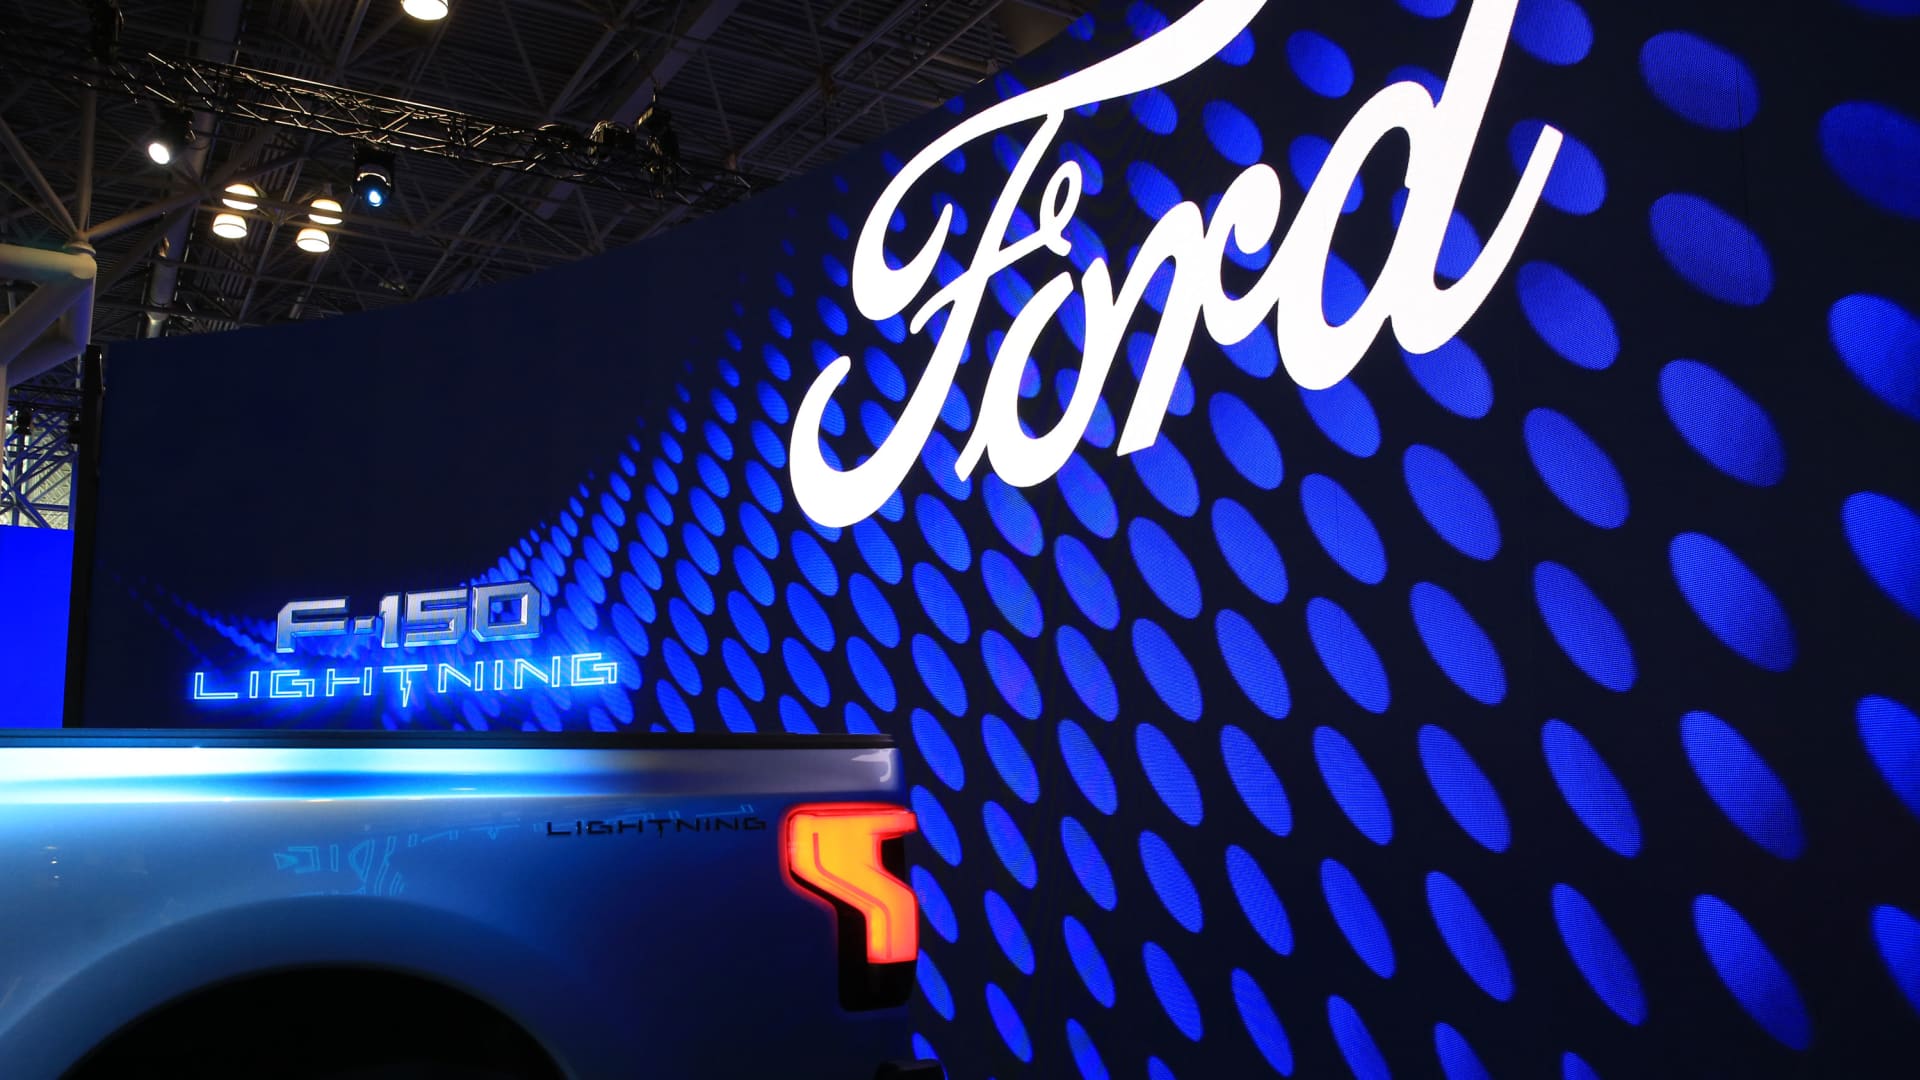 Ford stock suffers worst day since 2011 after cost warning